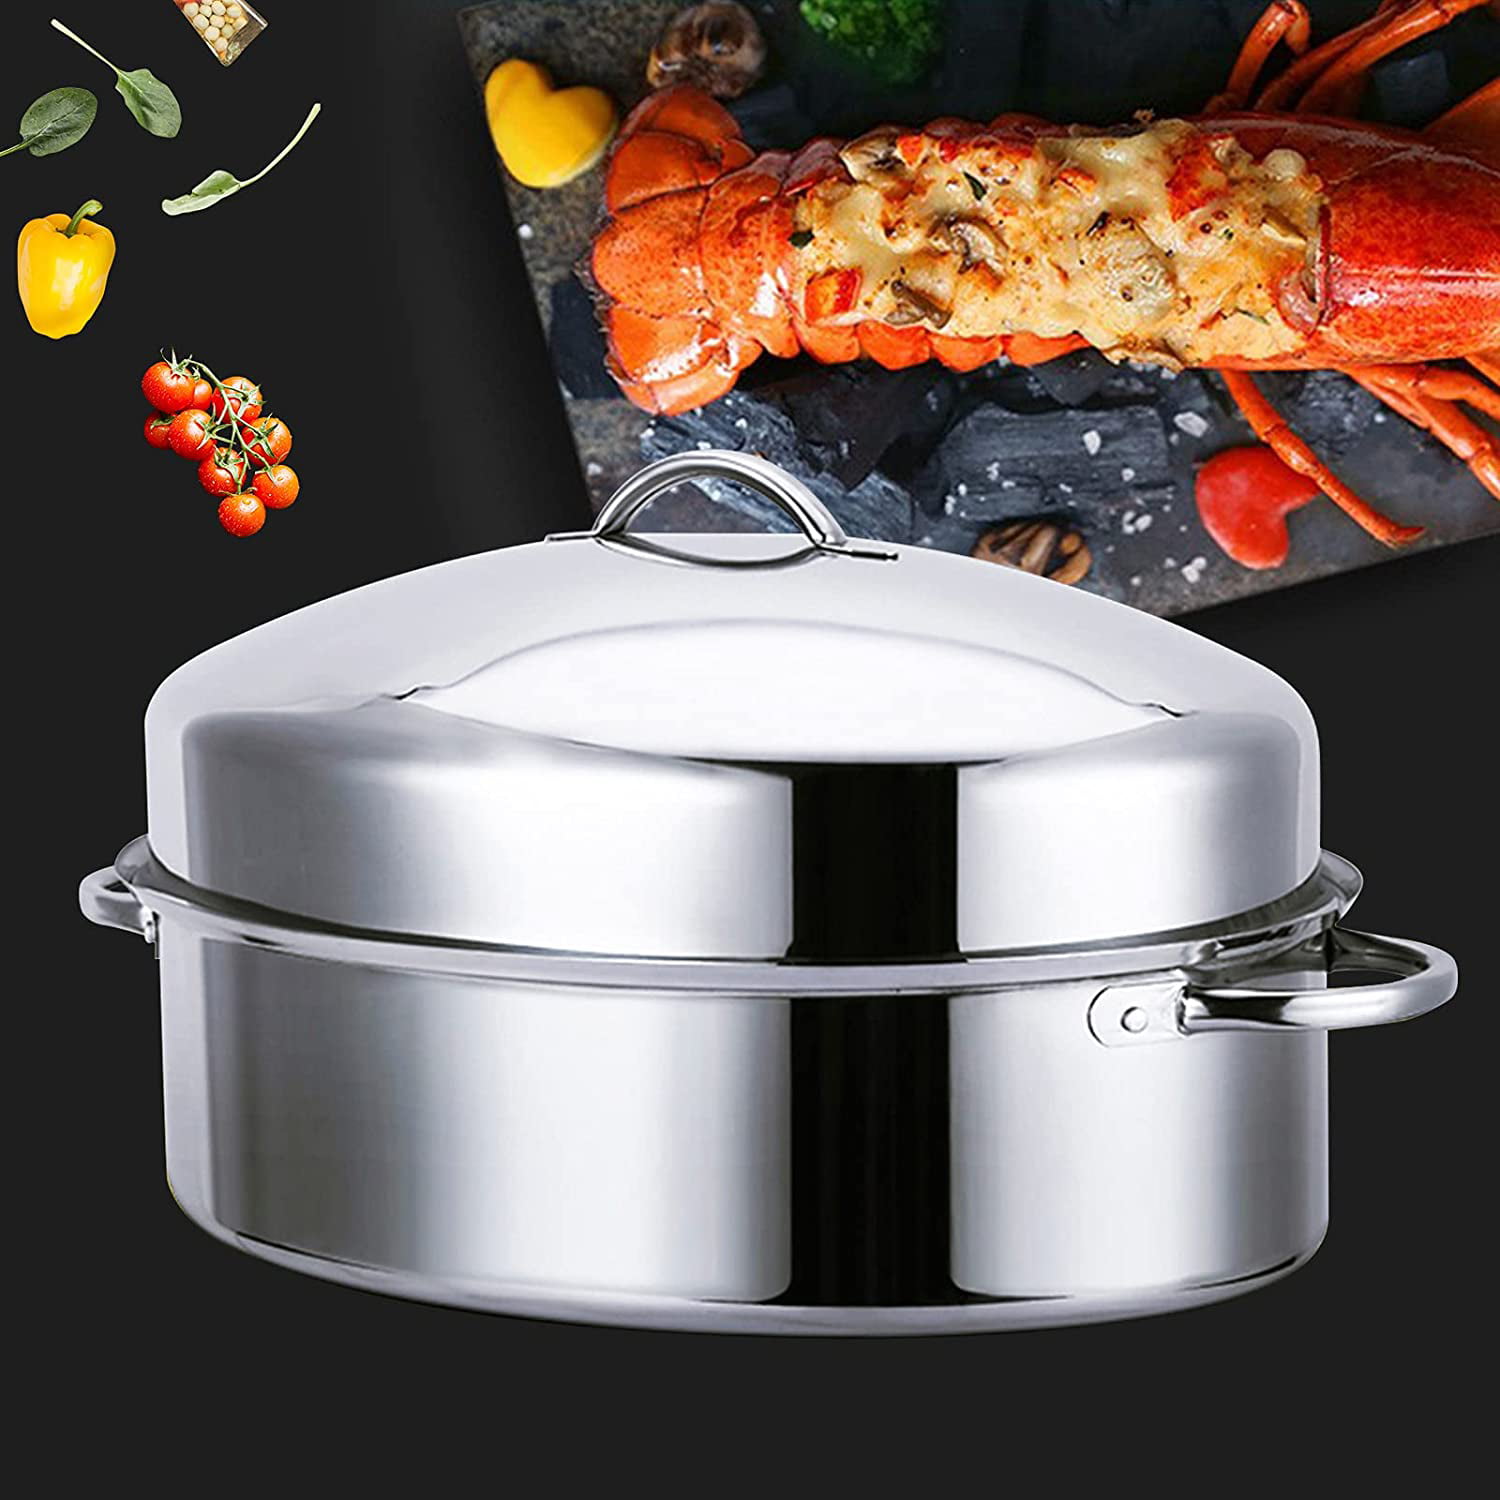 Fish kettle 304 stainless steel steamed fish pot Extra large fish